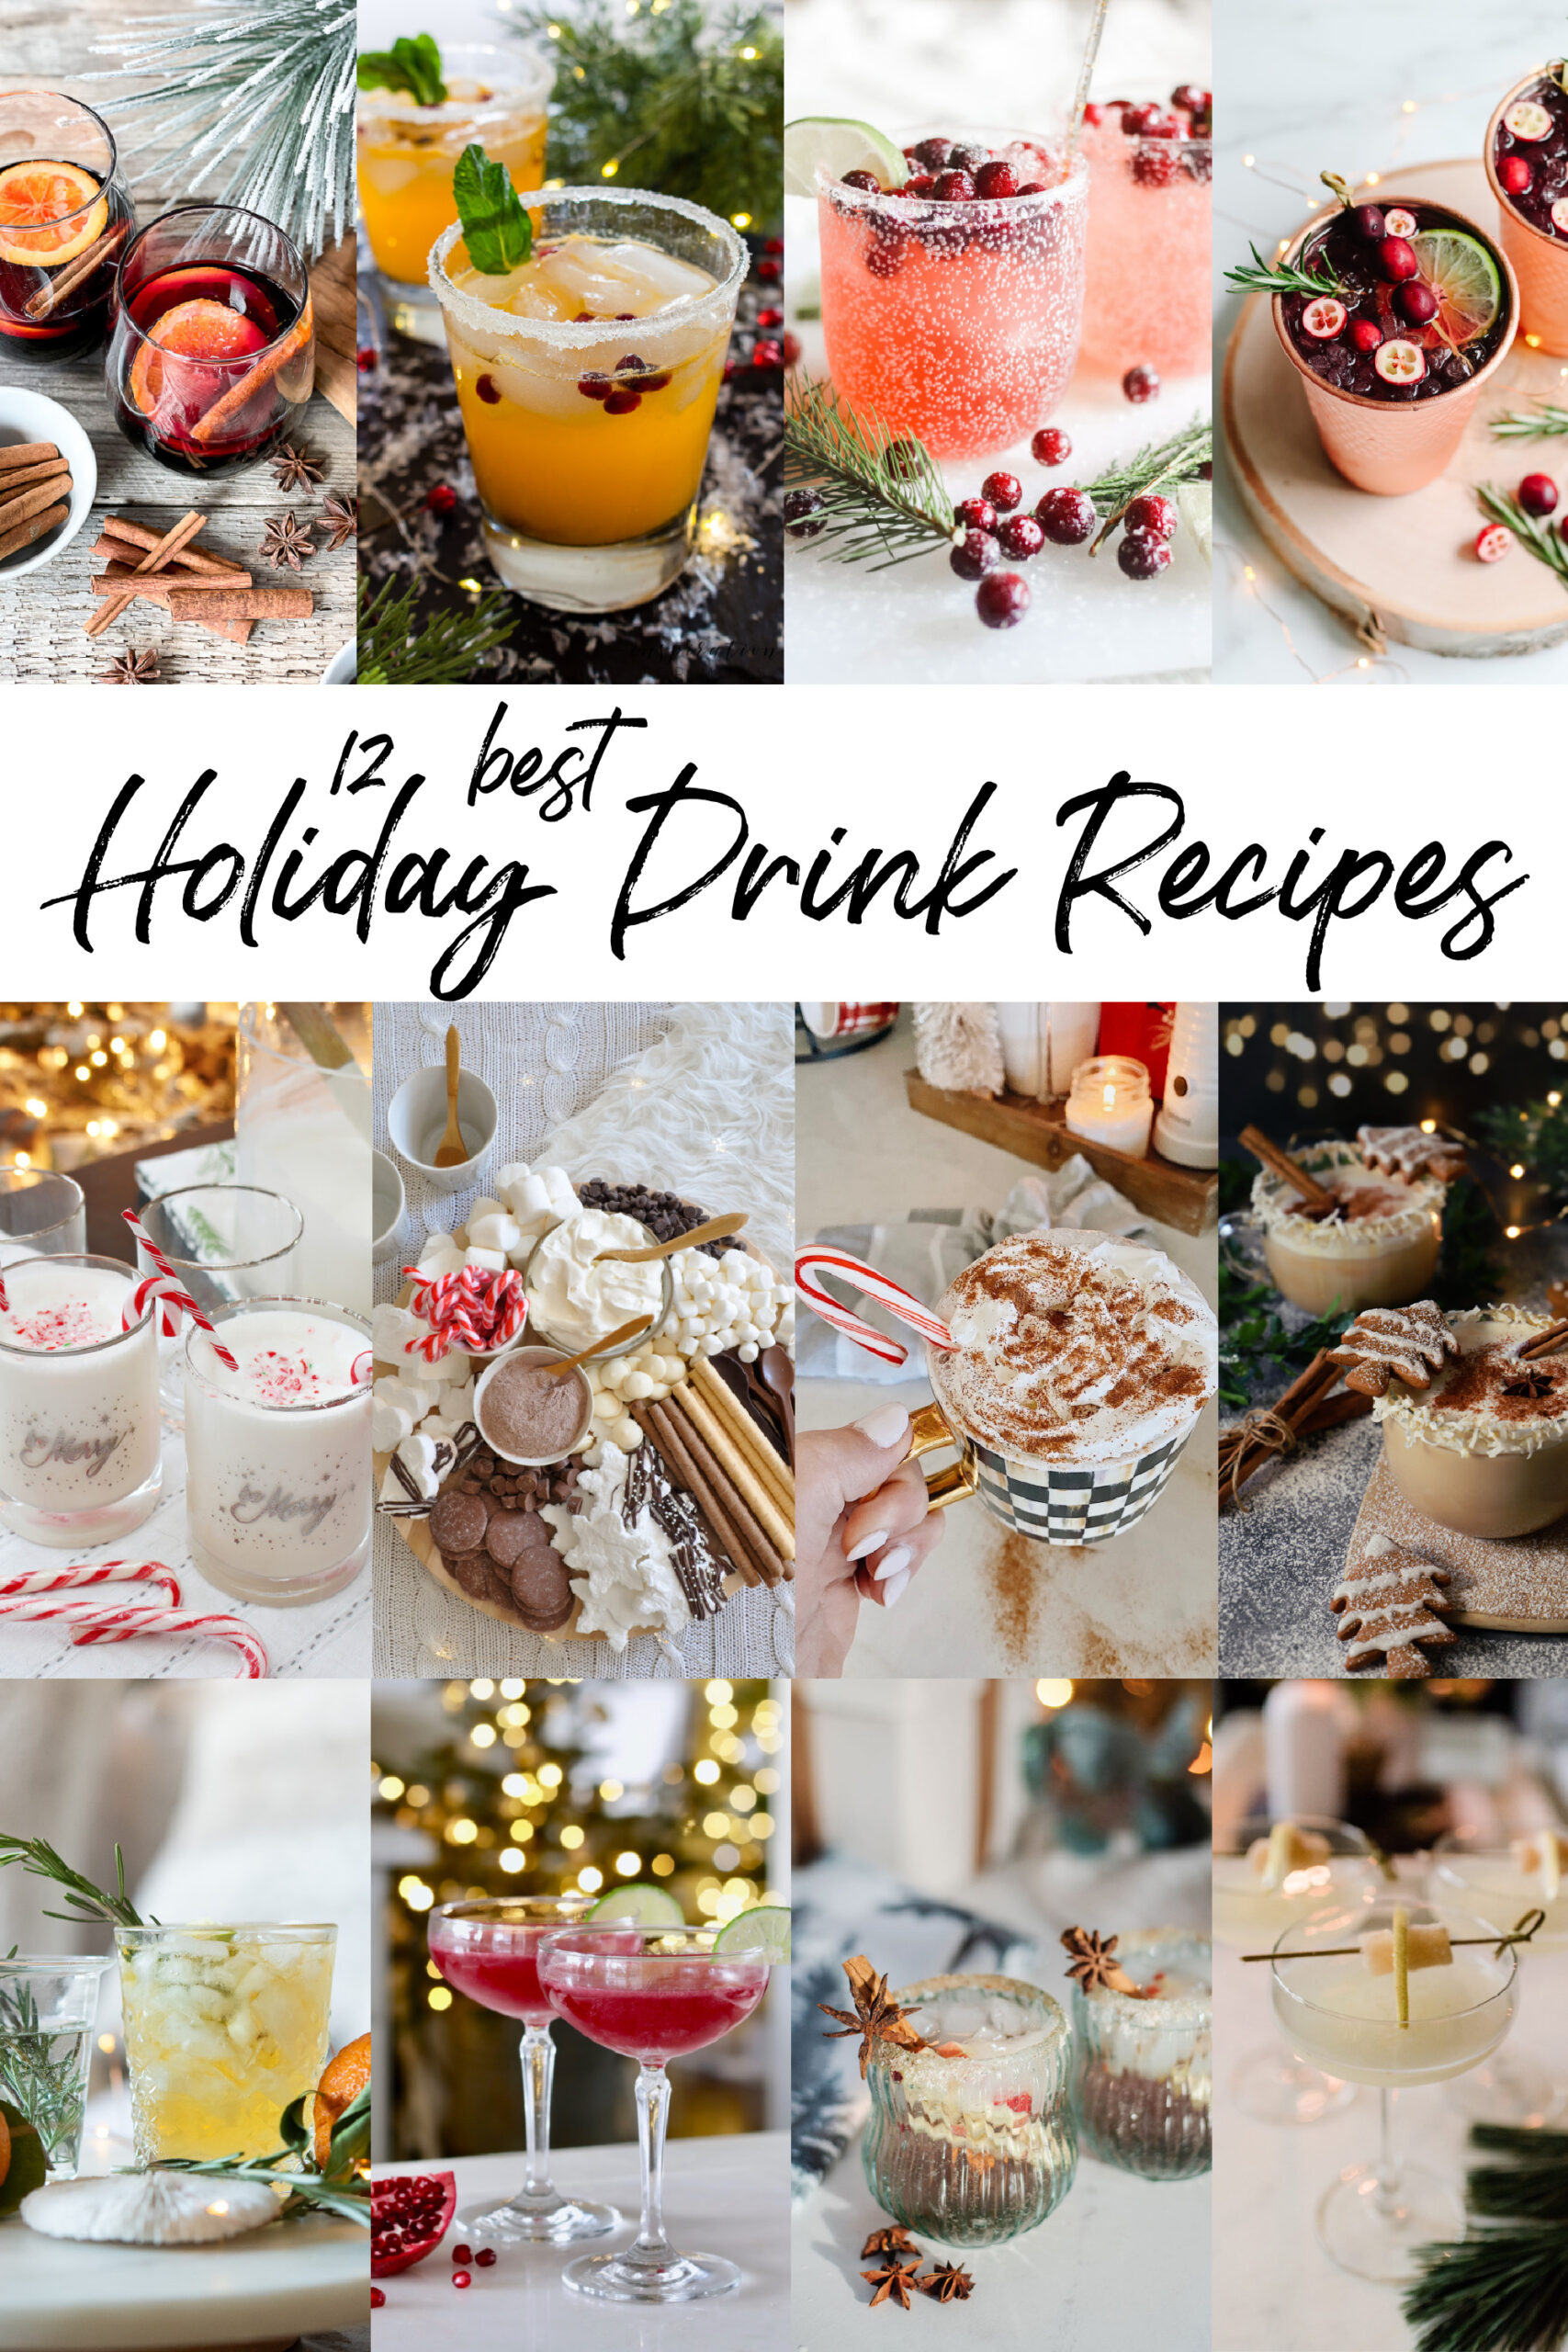 A collage image of 12 different delicious holiday drink recipe ideas